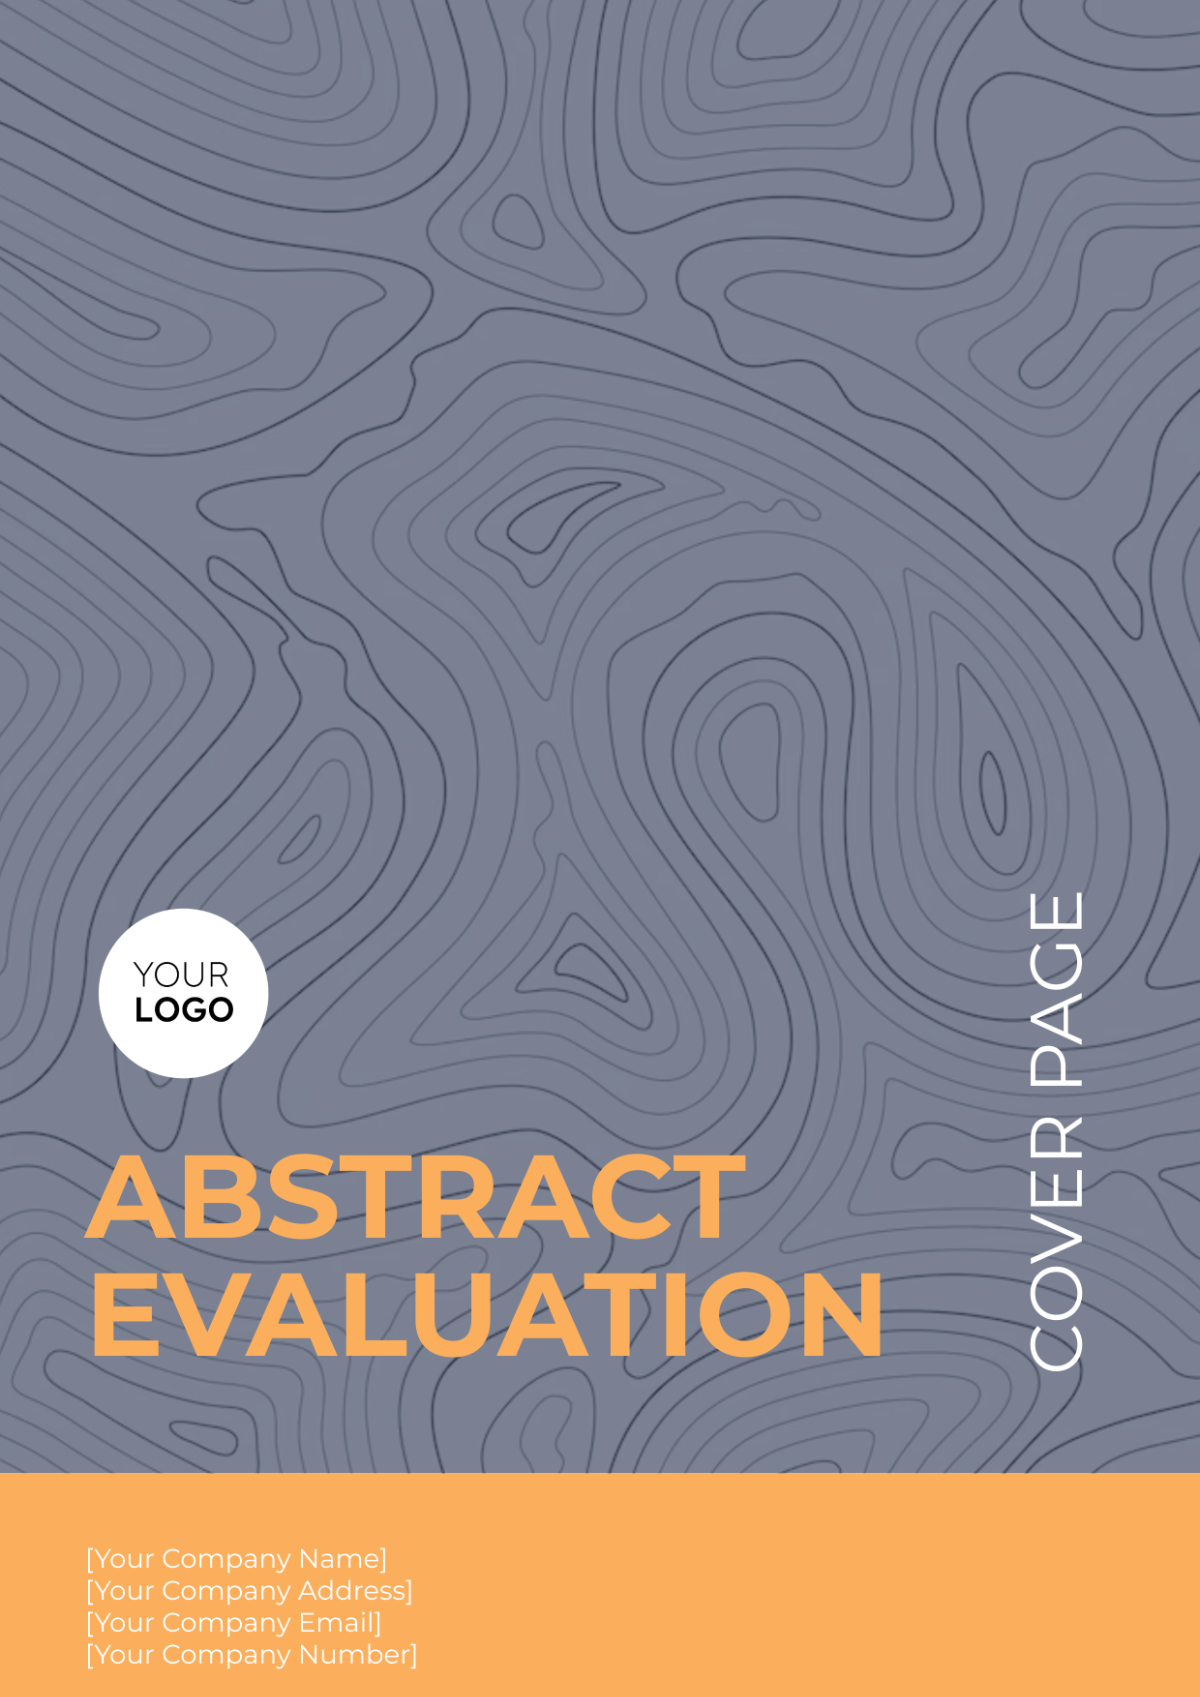 Abstract Evaluation Cover Page